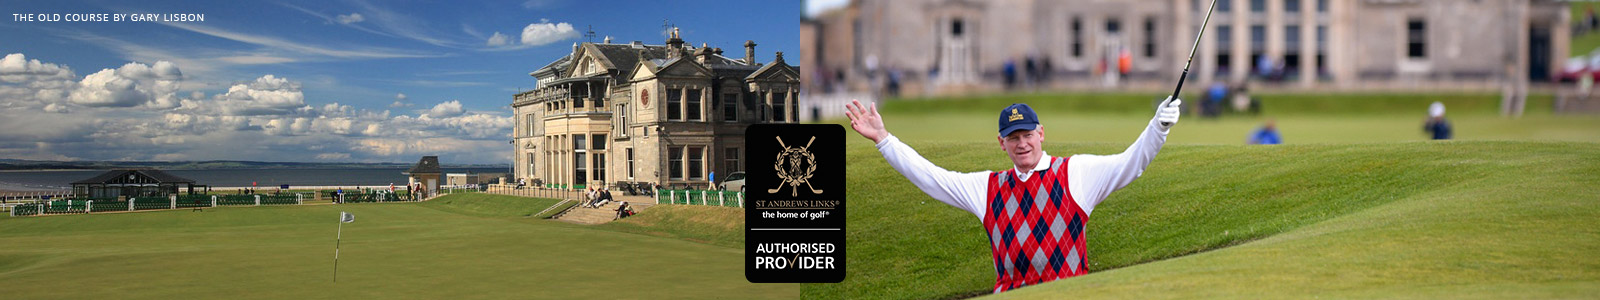 PerryGolf Old Course St Andrews Guaranteed Tee Times - Authorised Provider - PerryGolf.com